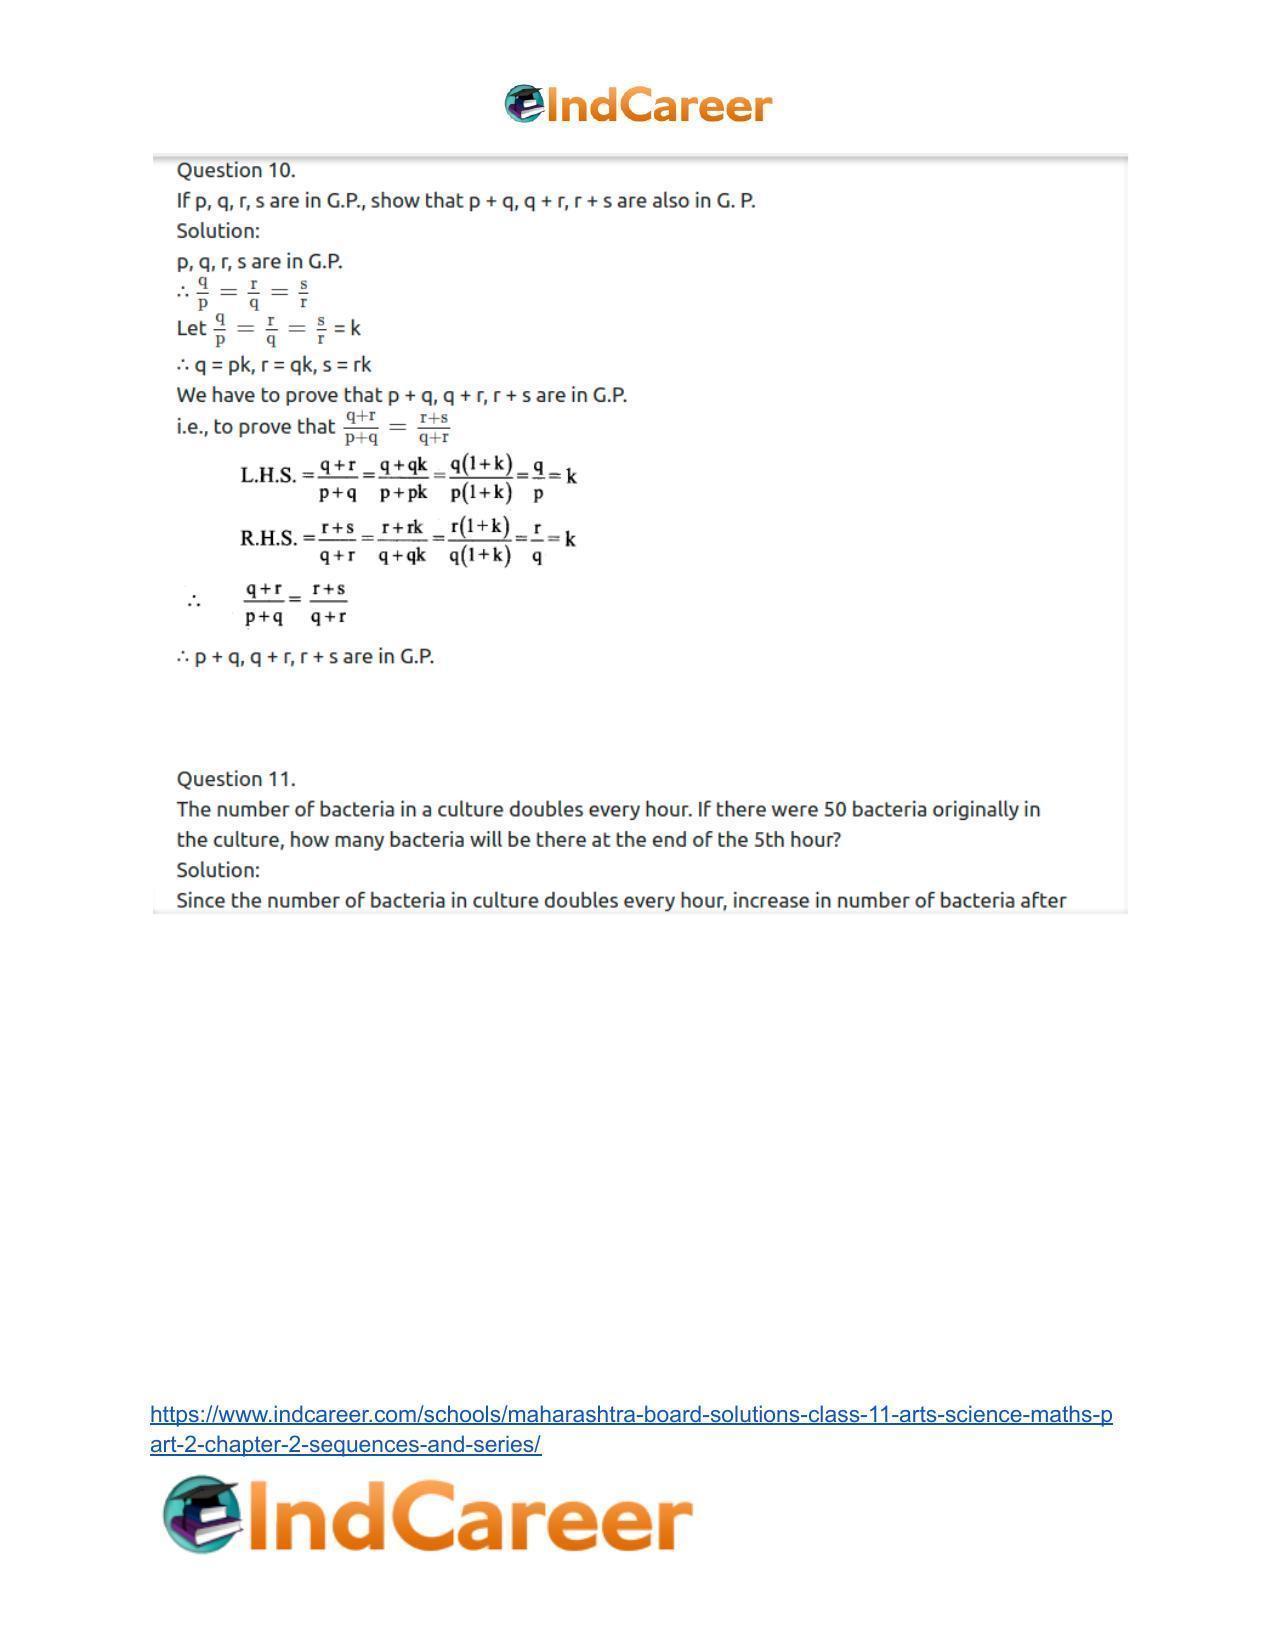 Maharashtra Board Solutions Class 11-Arts & Science Maths (Part 2): Chapter 2- Sequences and Series - Page 16